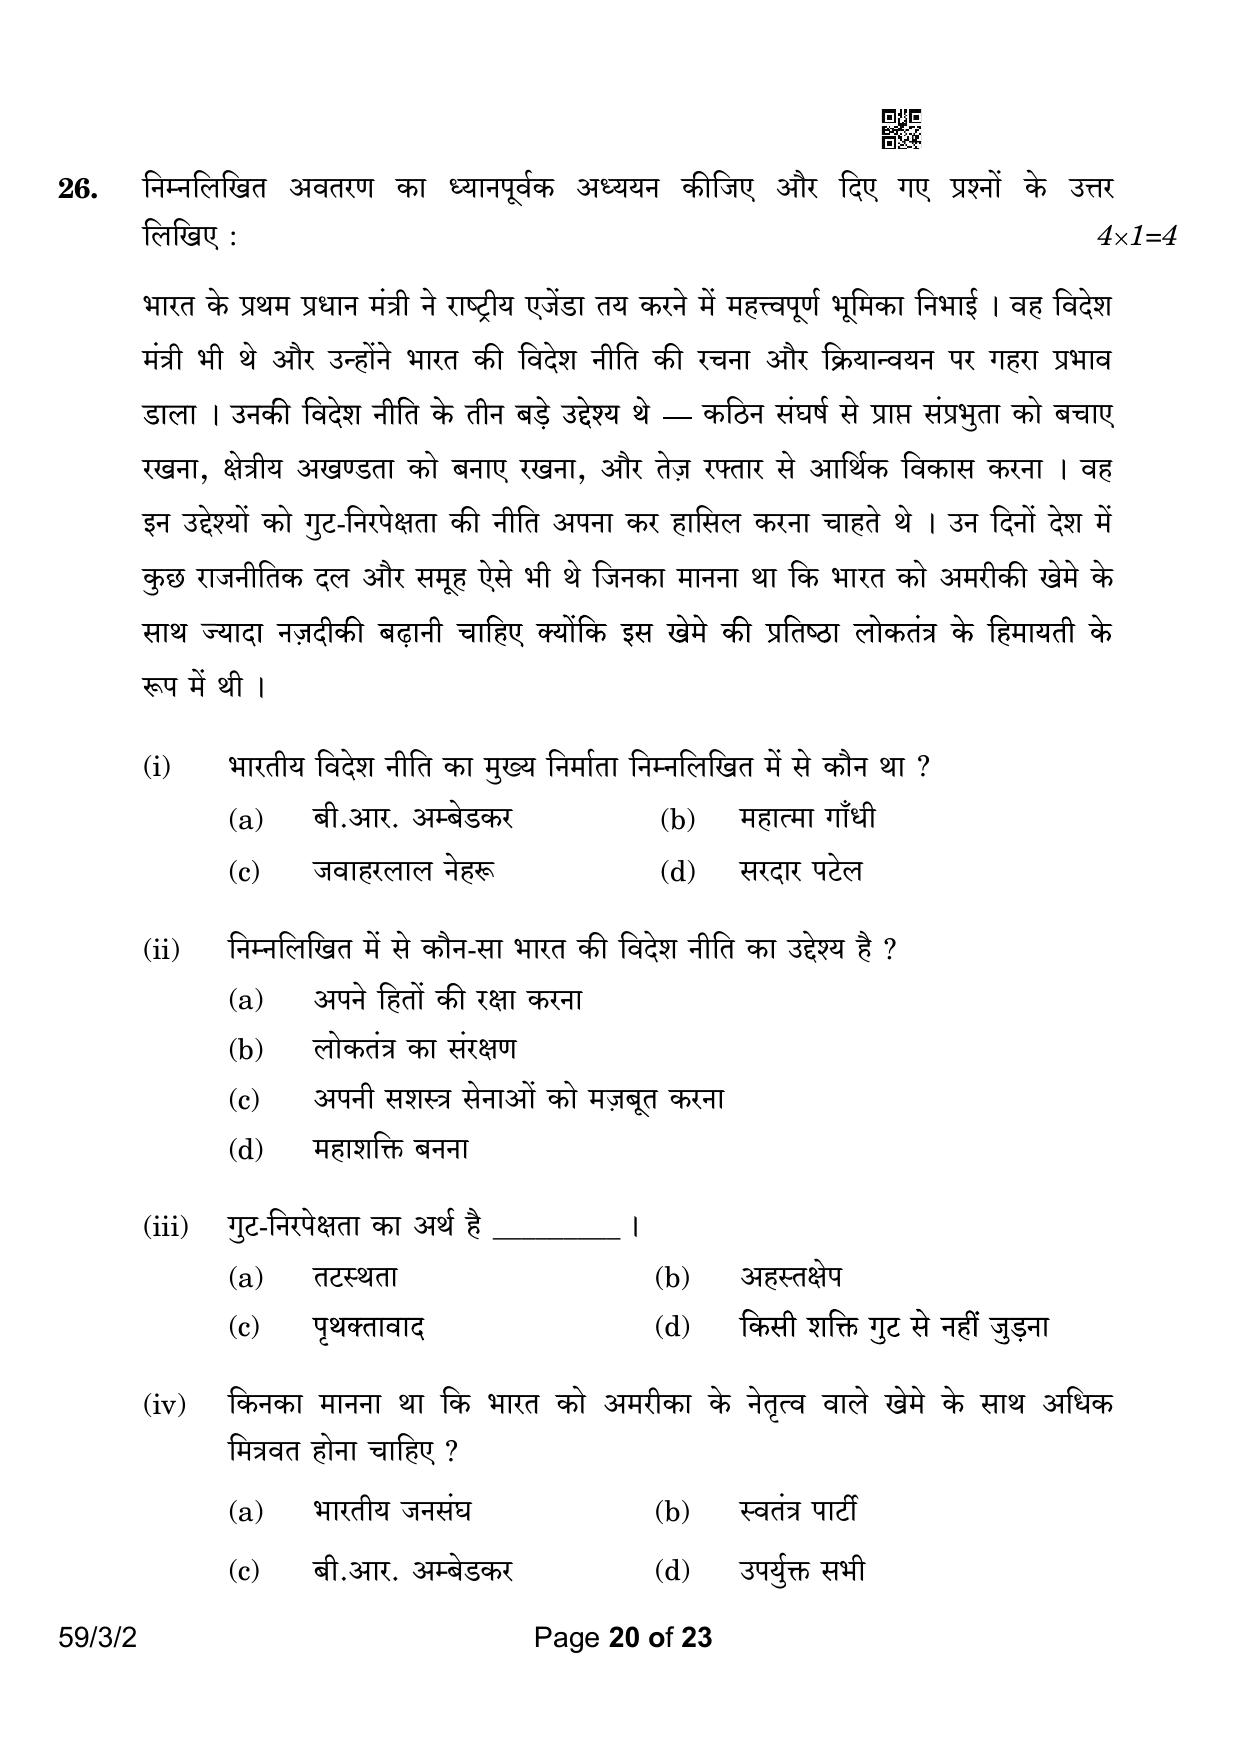 CBSE Class 12 59-3-2 Political Science 2023 Question Paper - Page 20